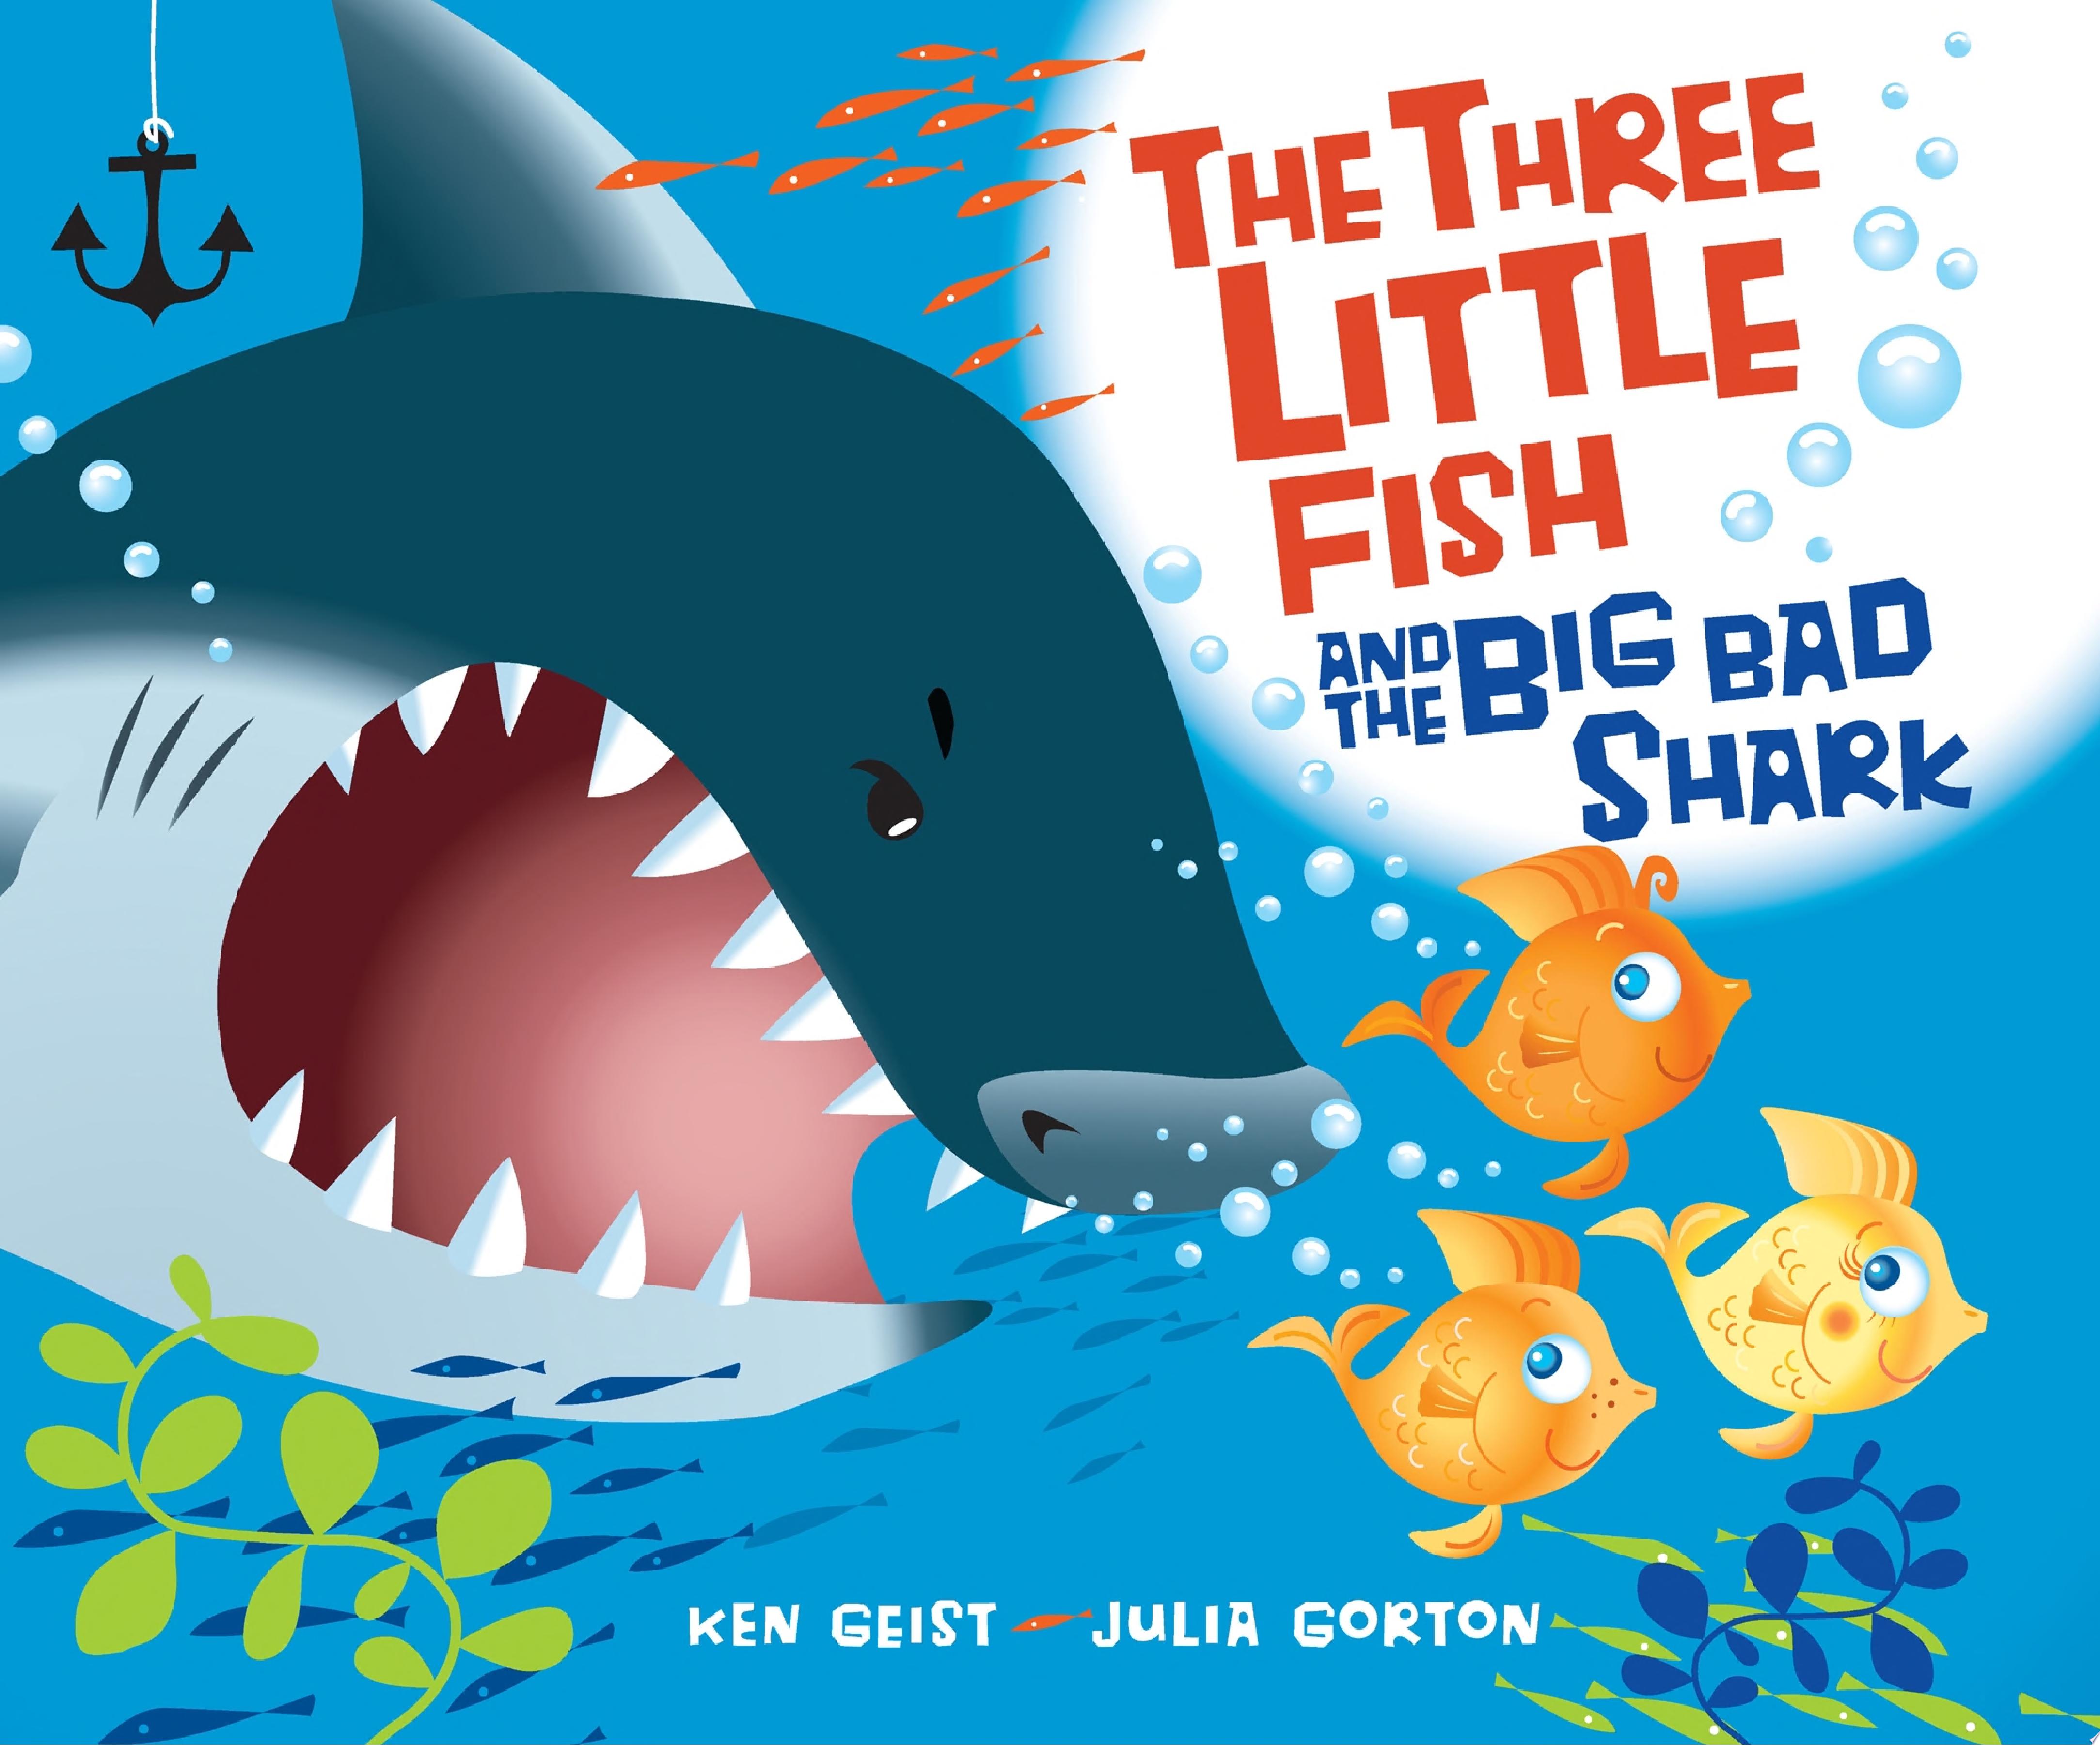 Image for "The Three Little Fish and the Big Bad Shark"